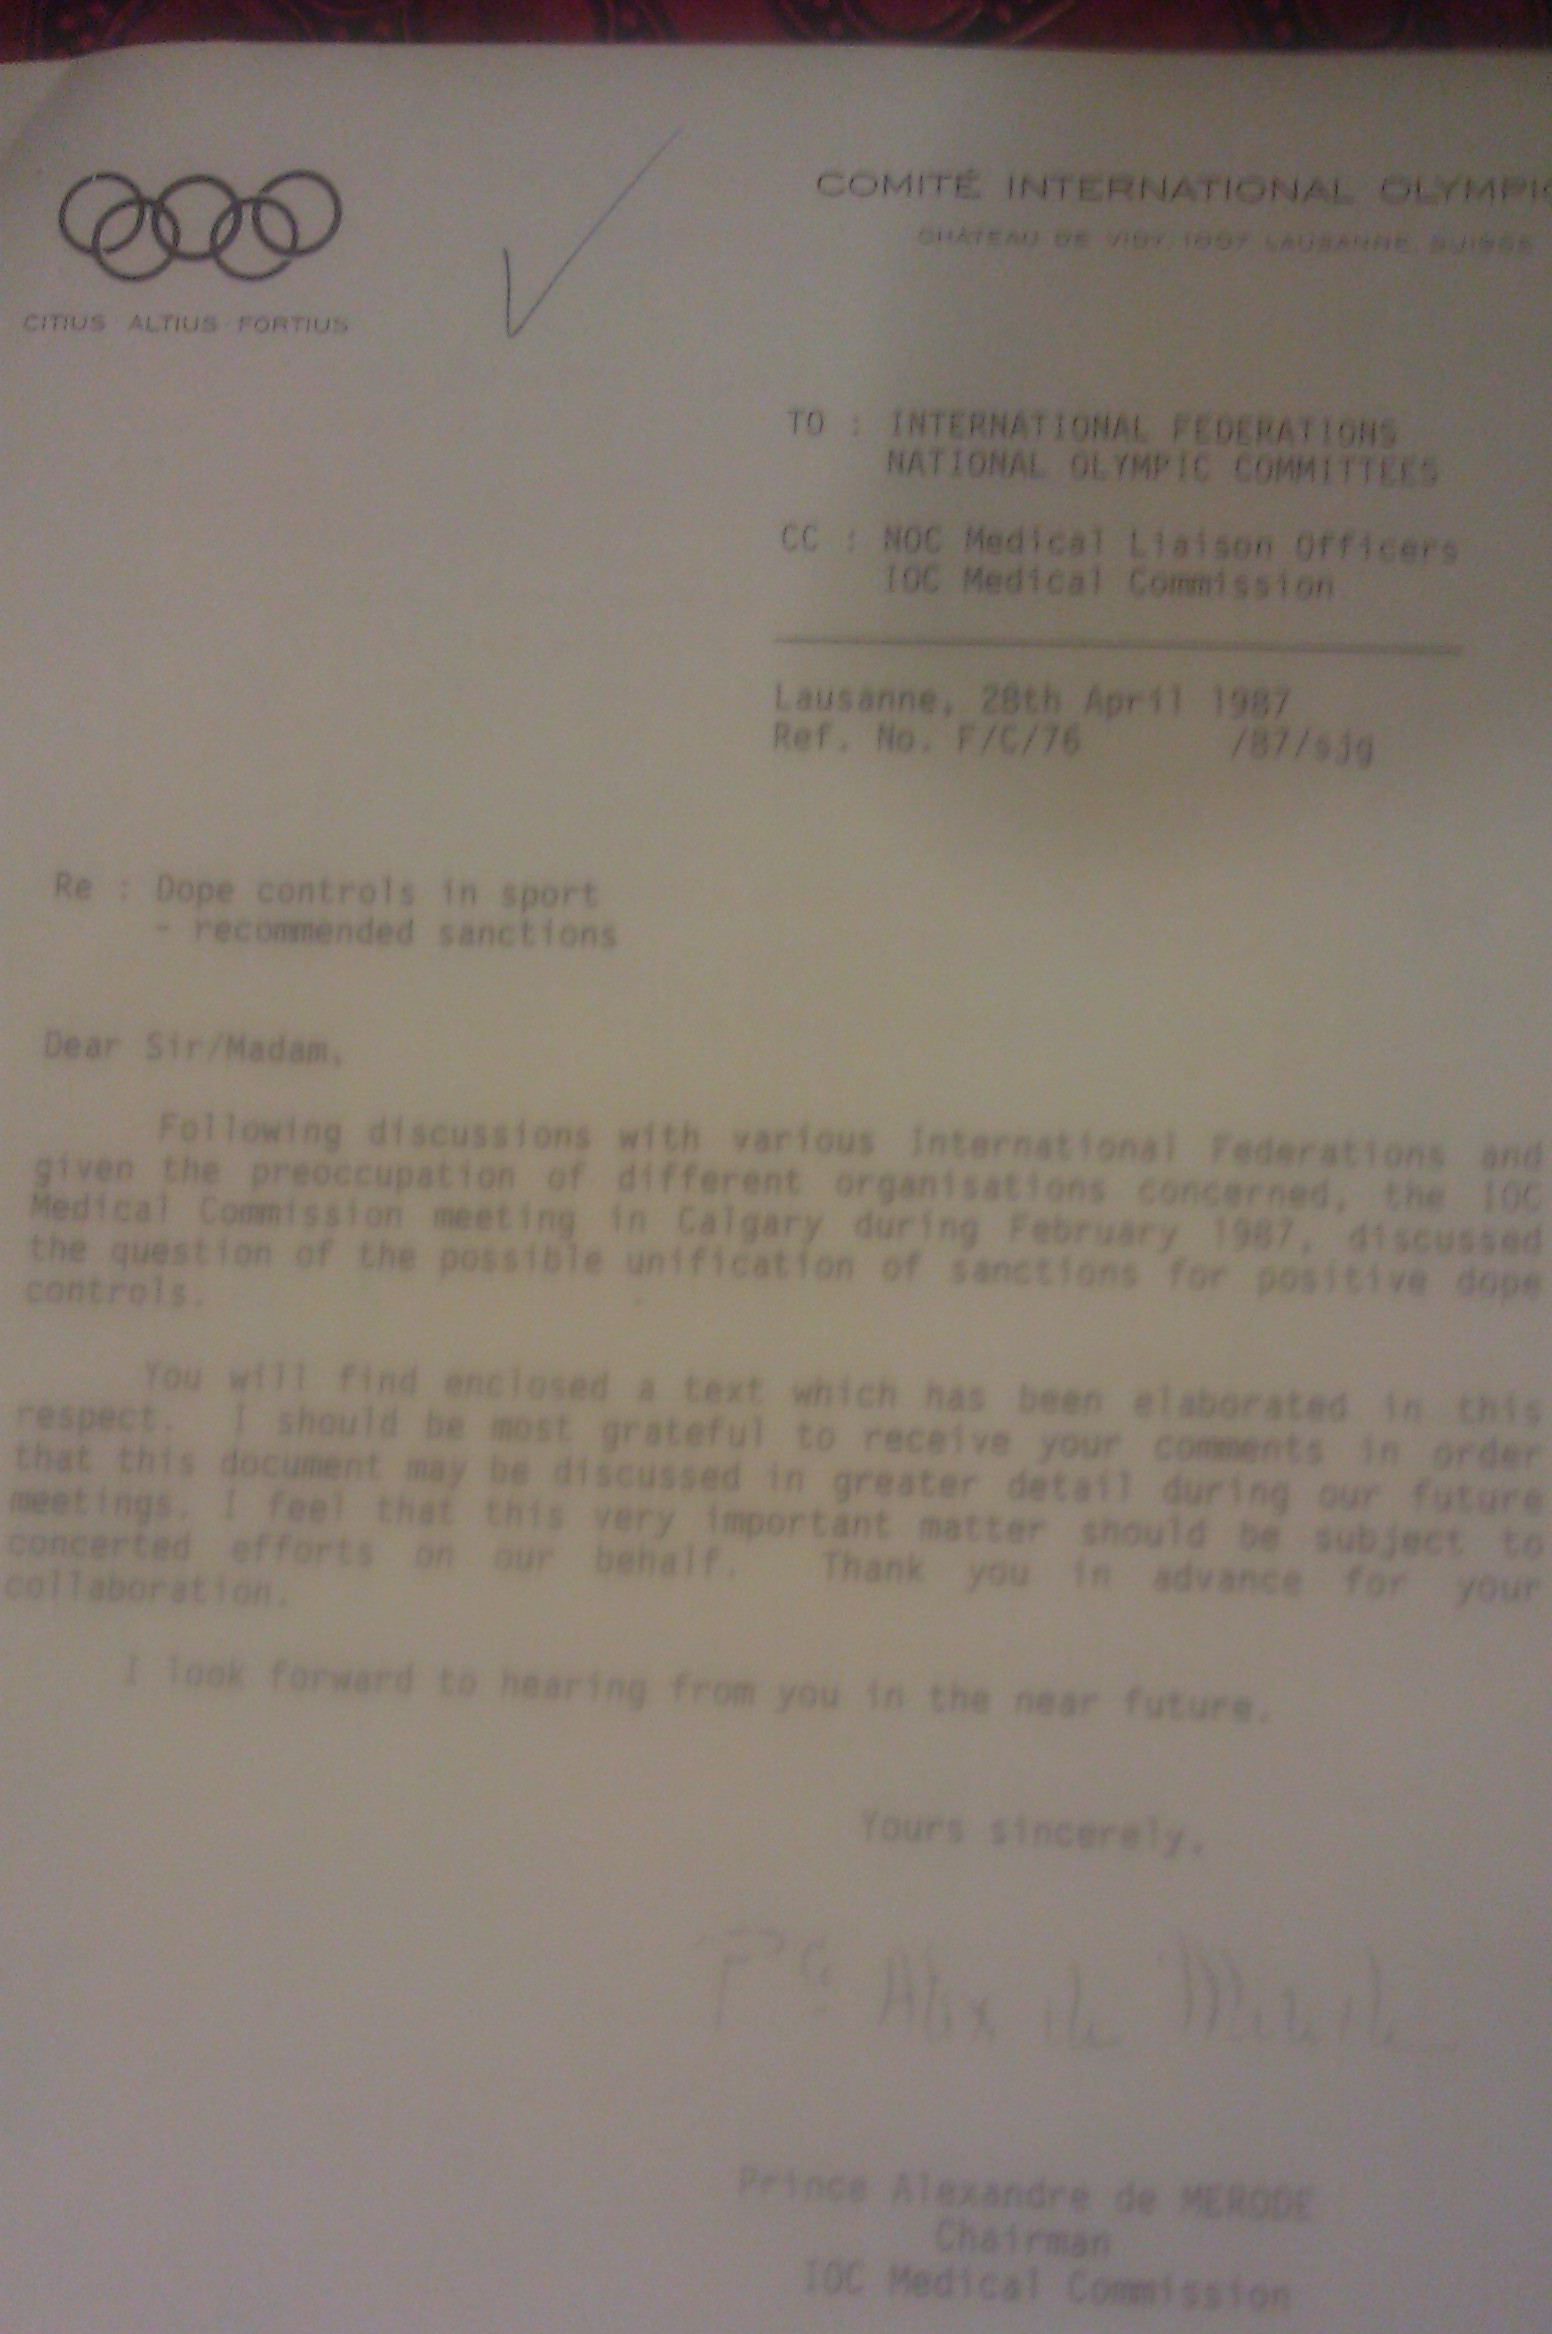 Prince Alexandre of Mérode's early circular which signalled the start of the IOC's fight against doping in 1987